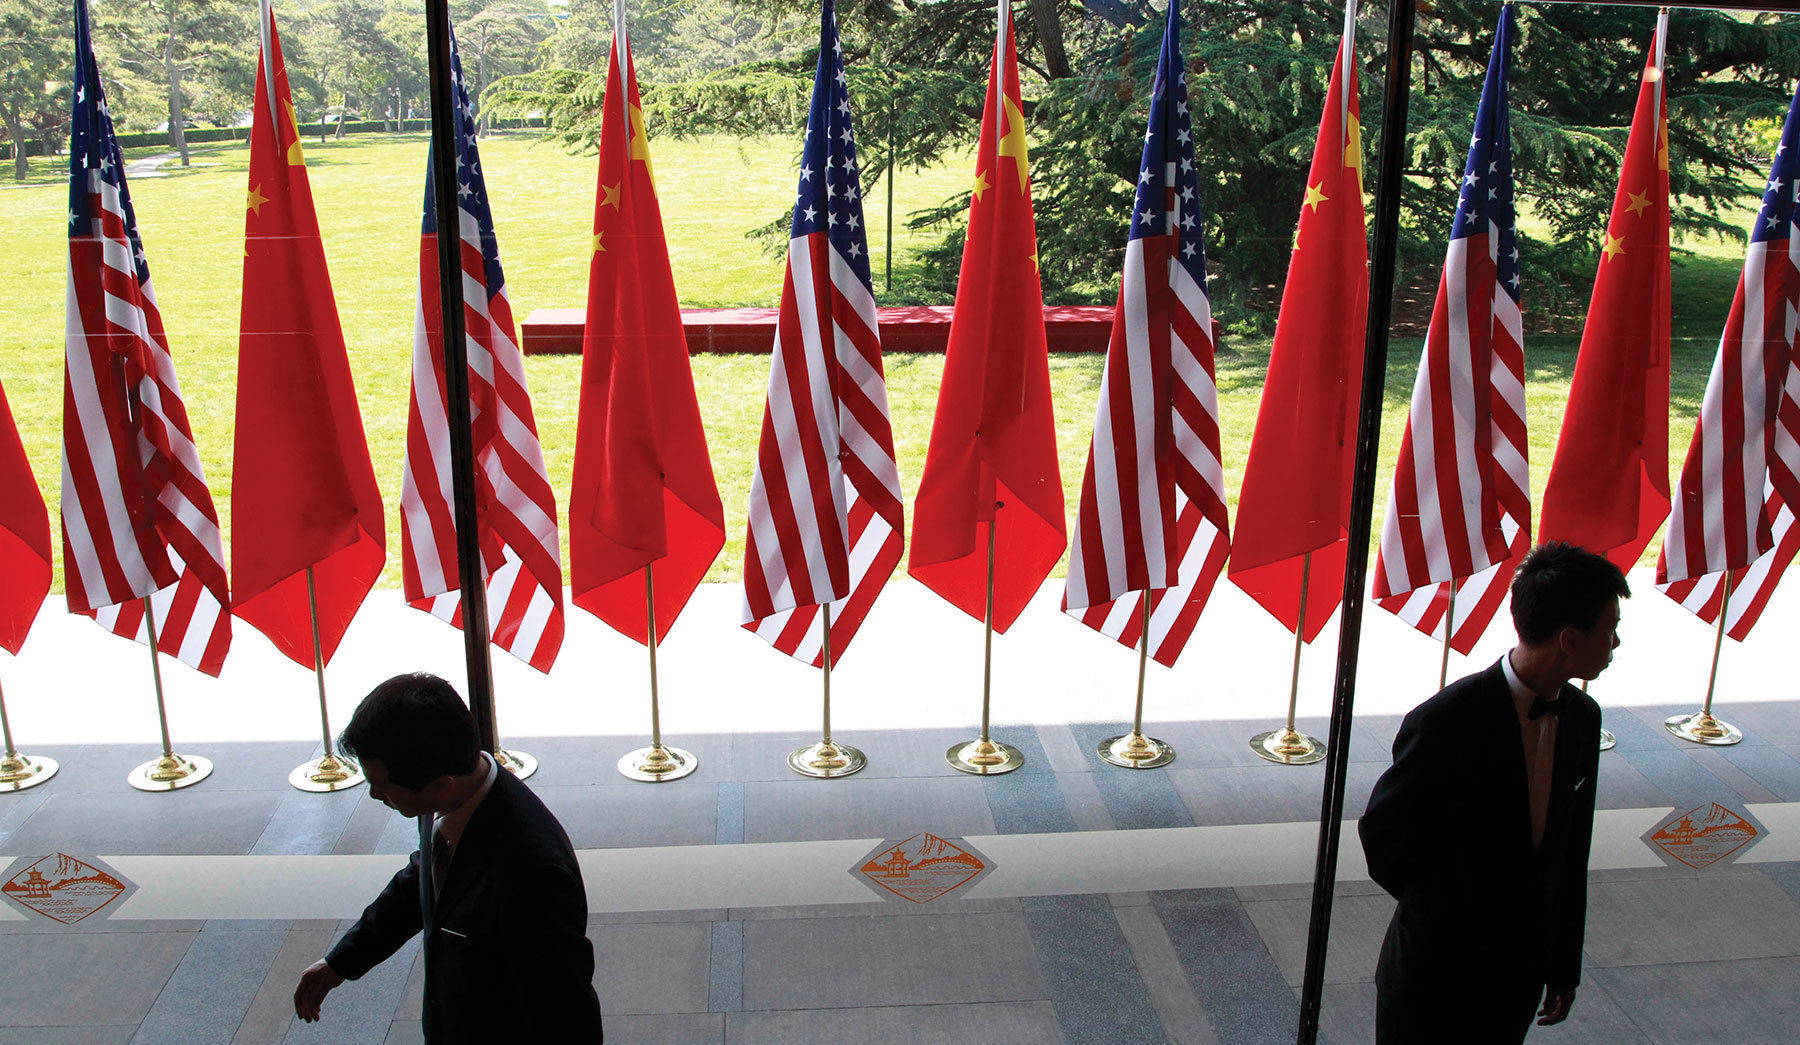 Chinese and U.S. national flags are posted for the opening ceremony of the U.S.-China Strategic and Economic Dialogue in Beijing in May 2012. (AP/Vincent Thian)